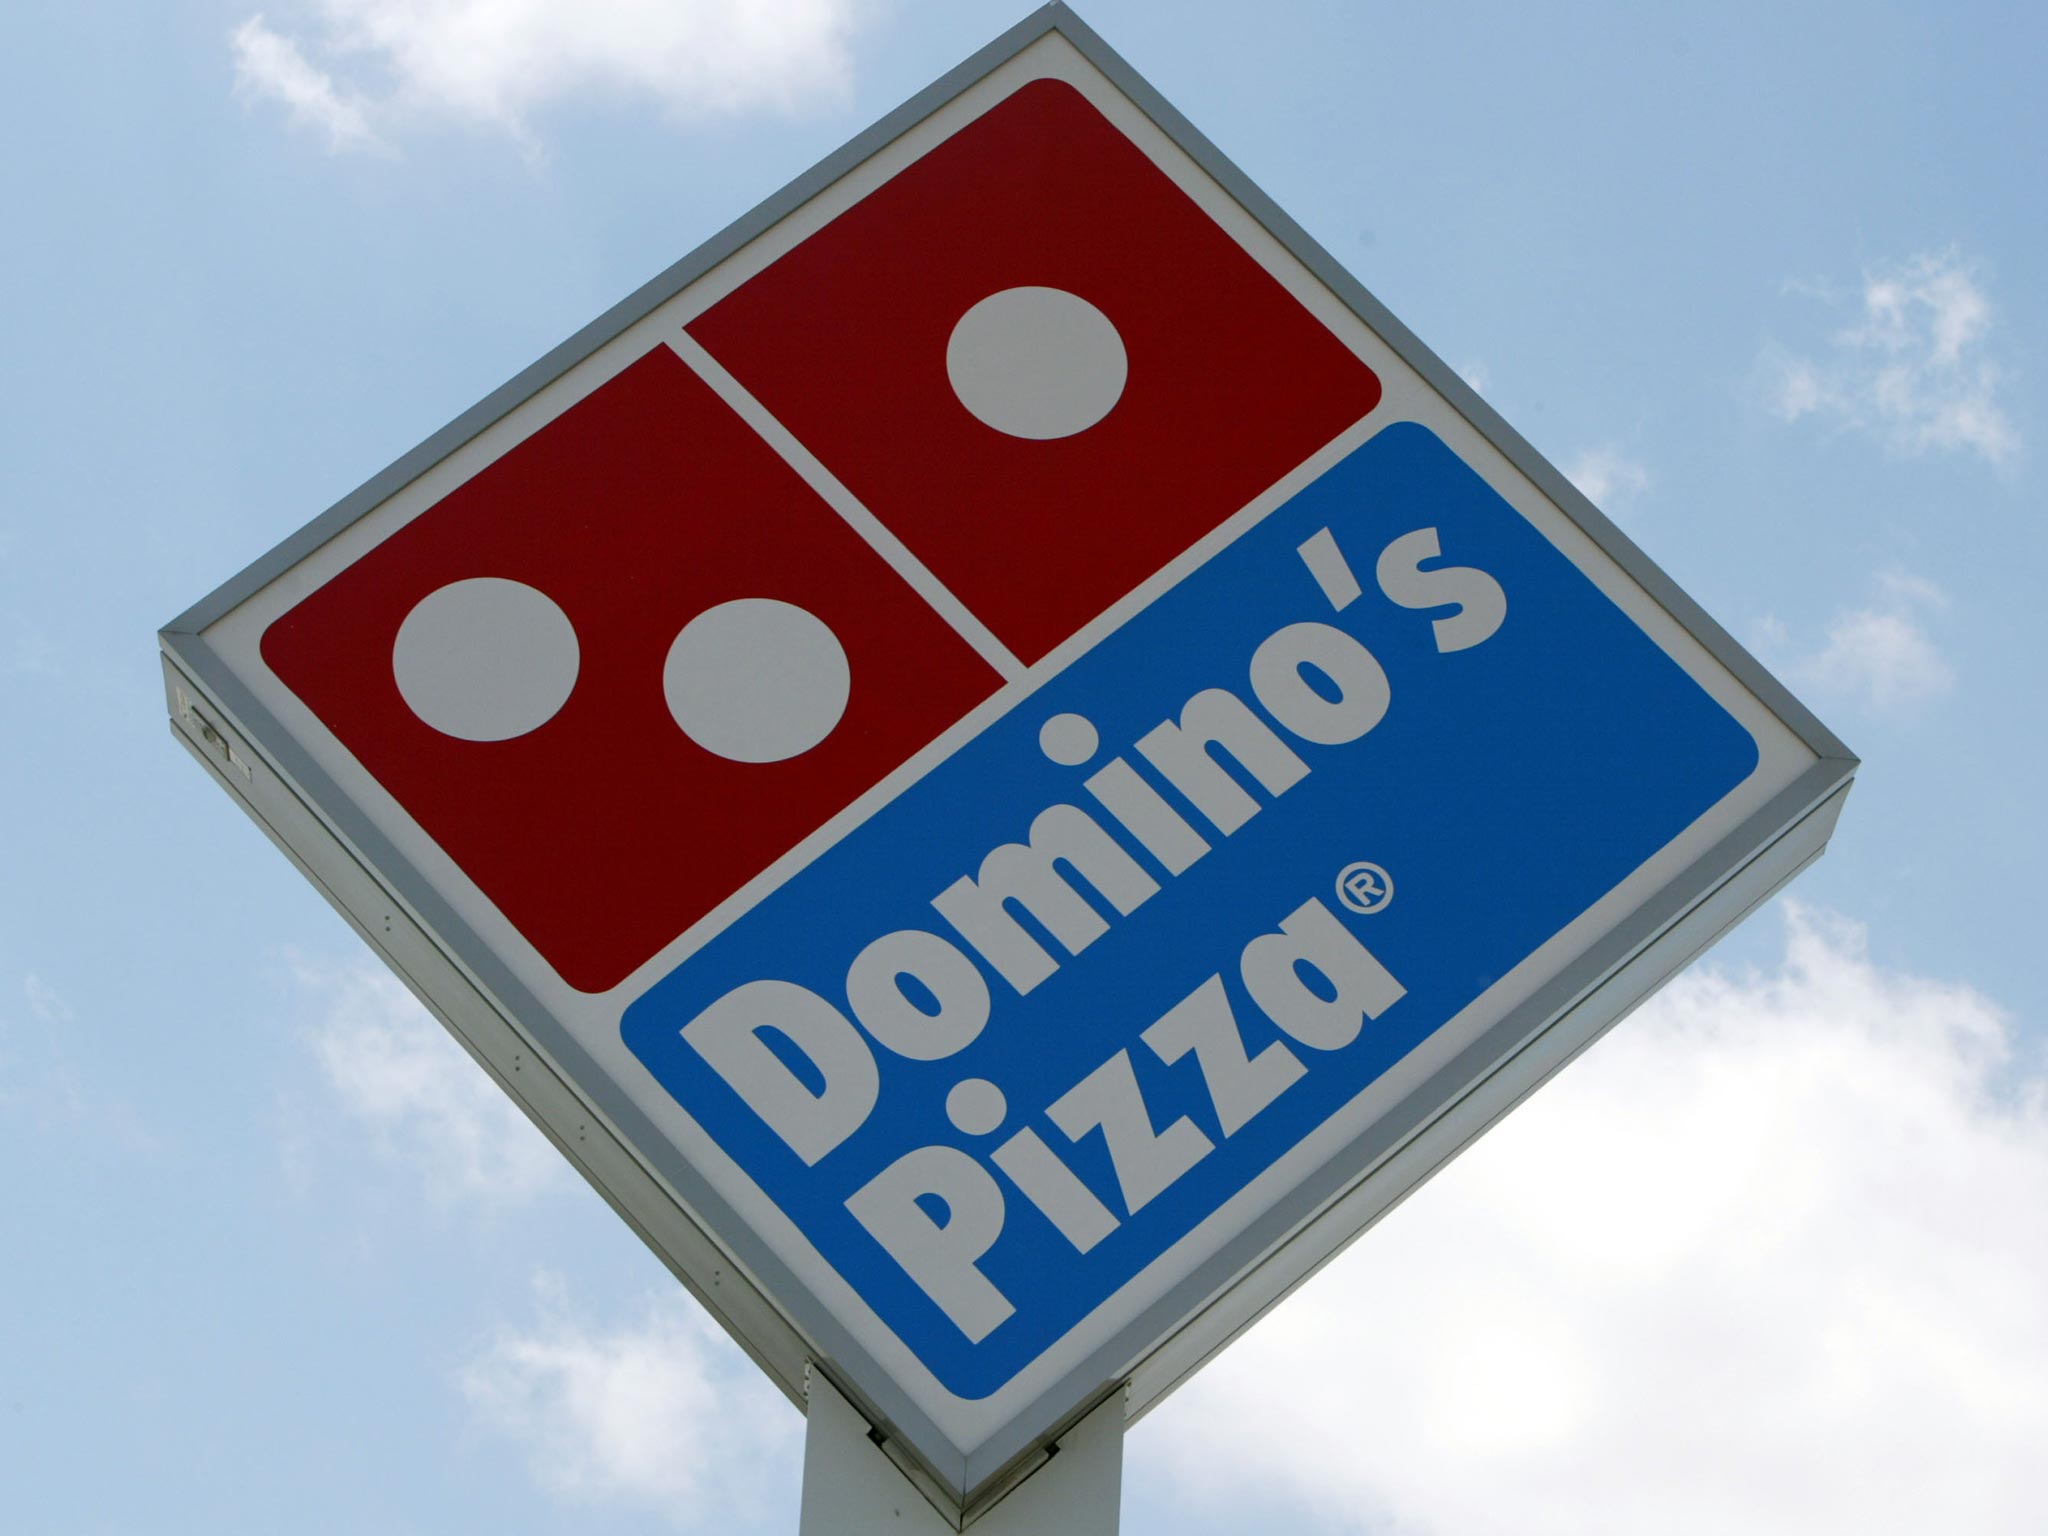 Domino’s said good summer sales were helped by cooler weather